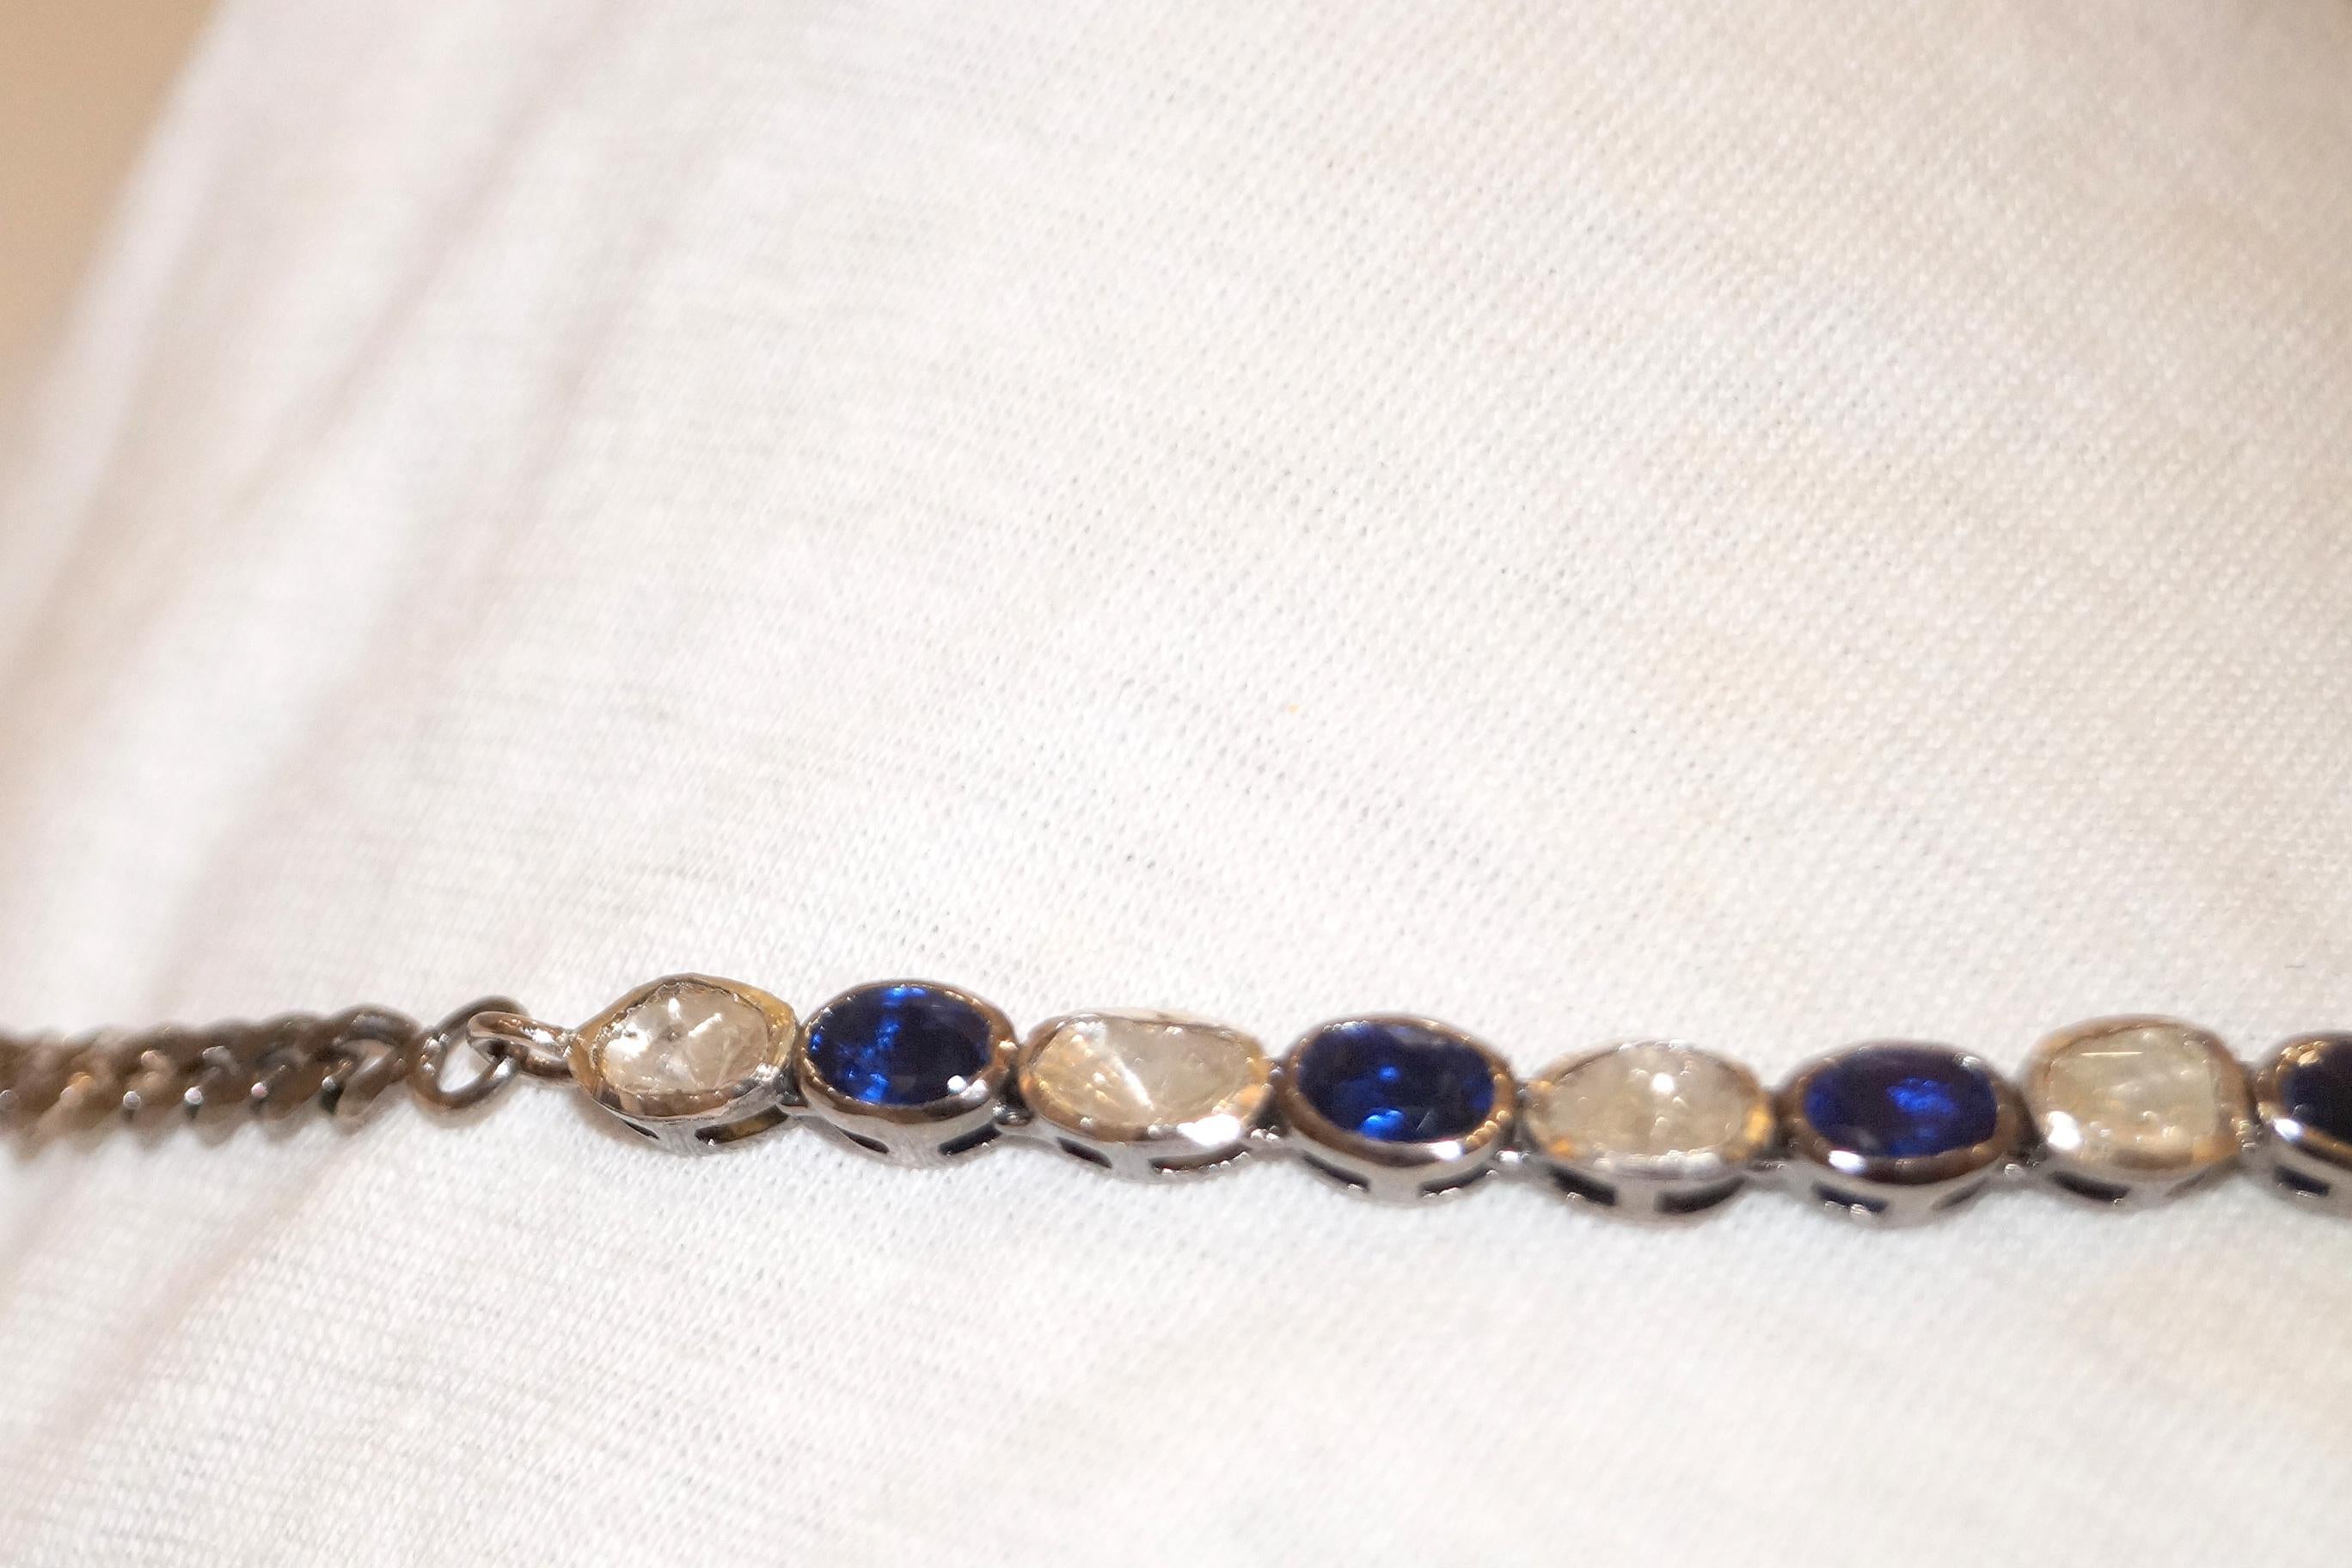 Certified diamond blue sapphire choker sterling silver necklace For Sale 2